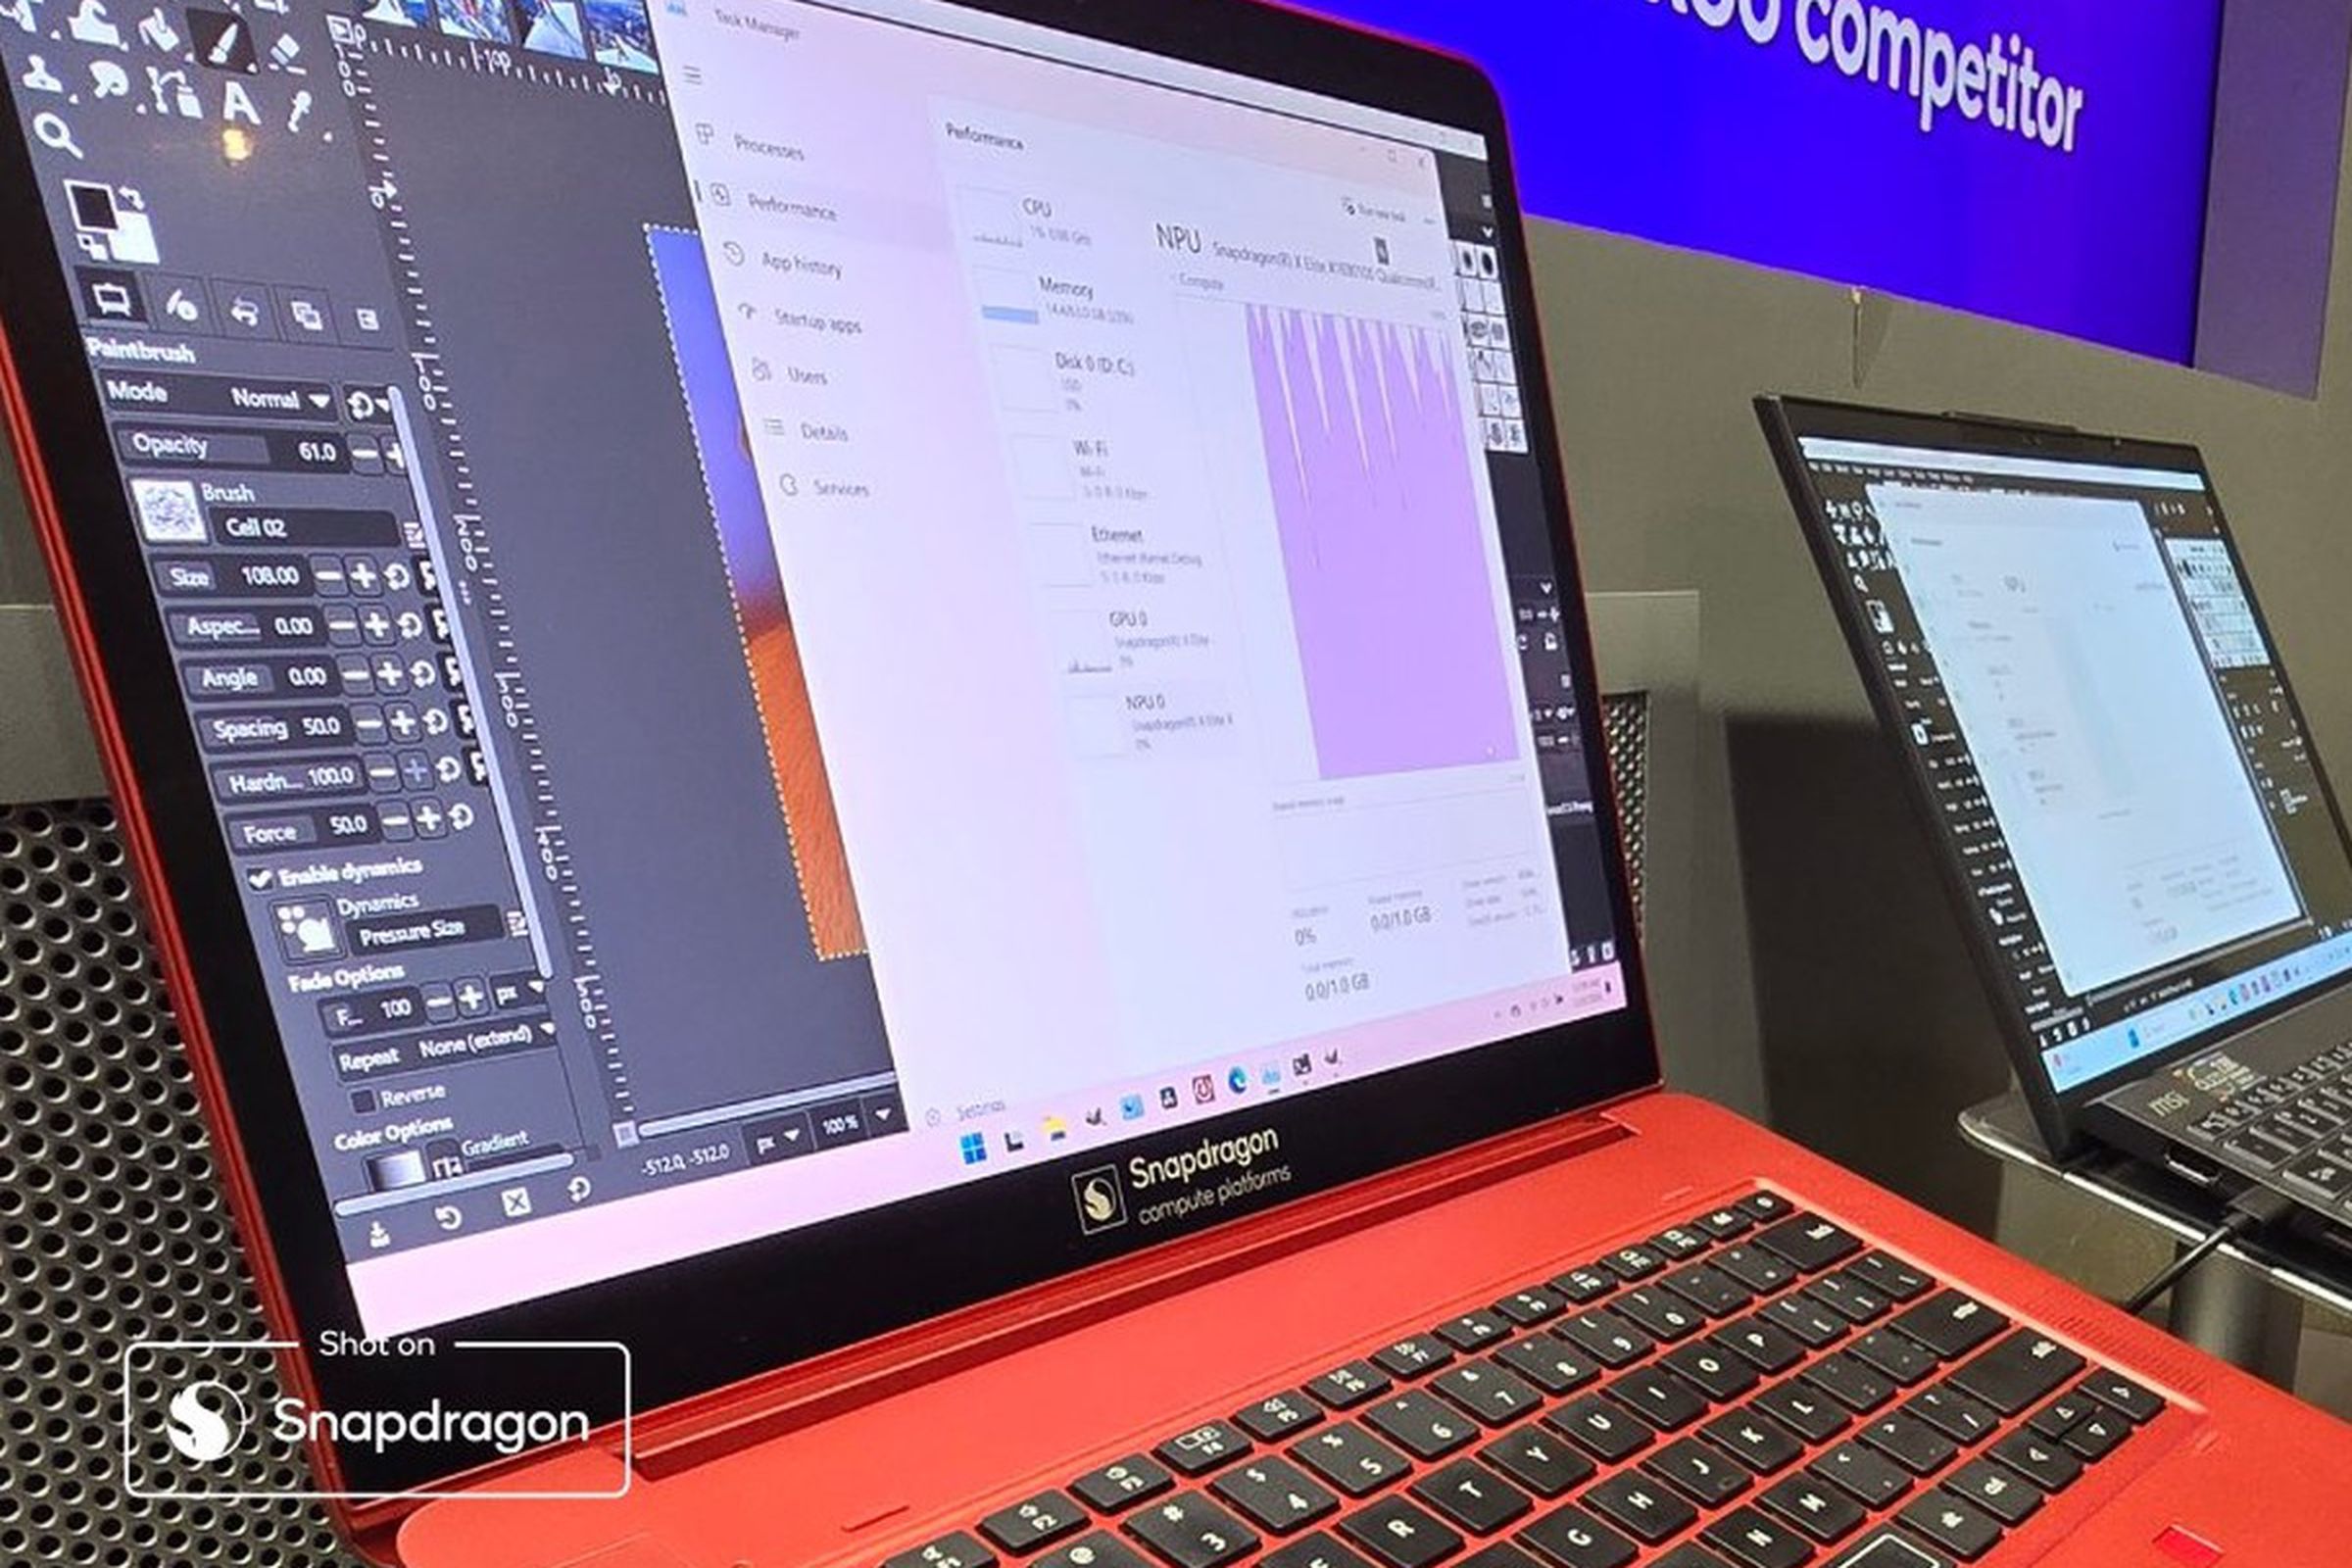 The red Snapdragon X Elite reference design laptop Qualcomm used to show off the games.